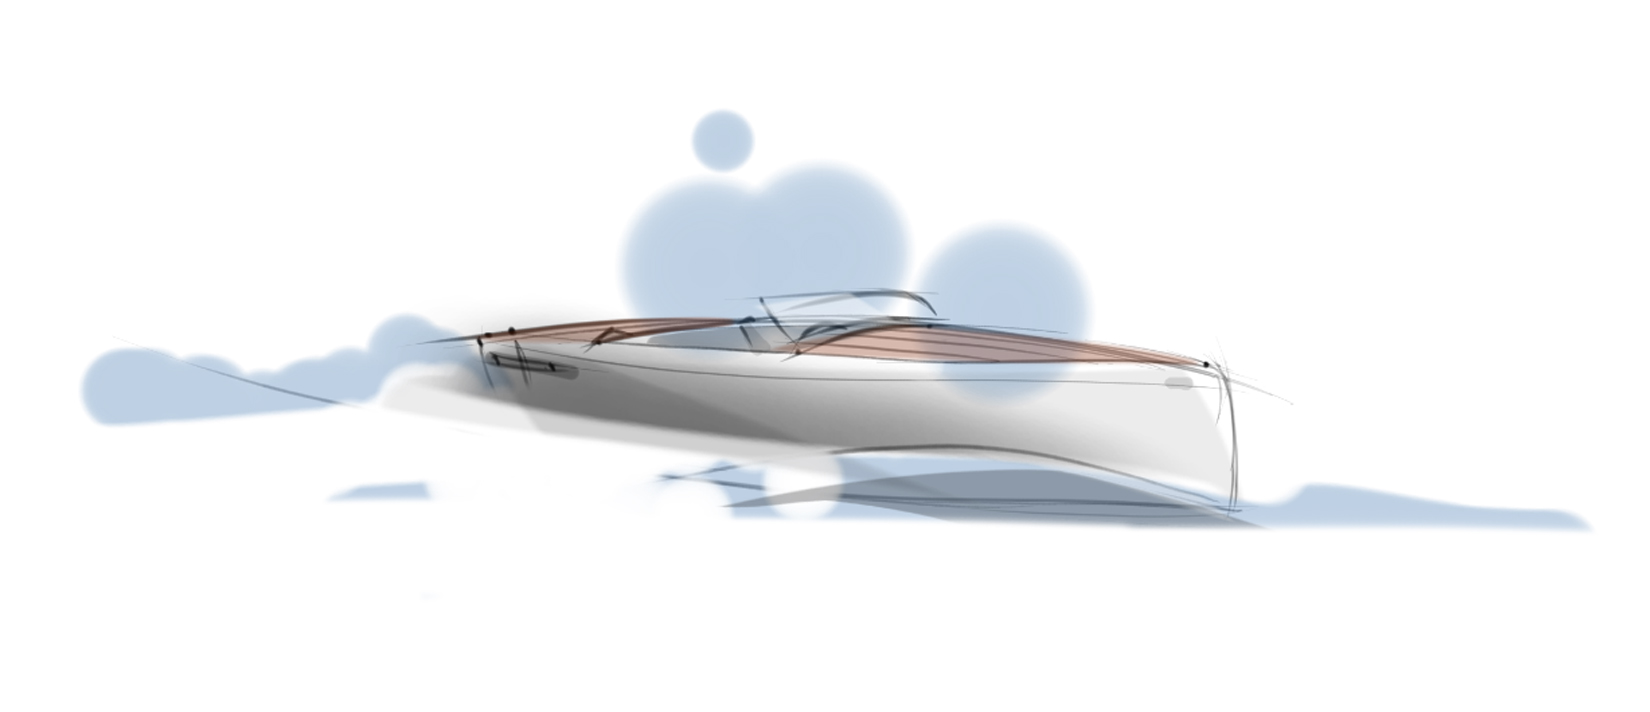 Sketching a Speed Boat: Using Arcs in Perspective - Core77